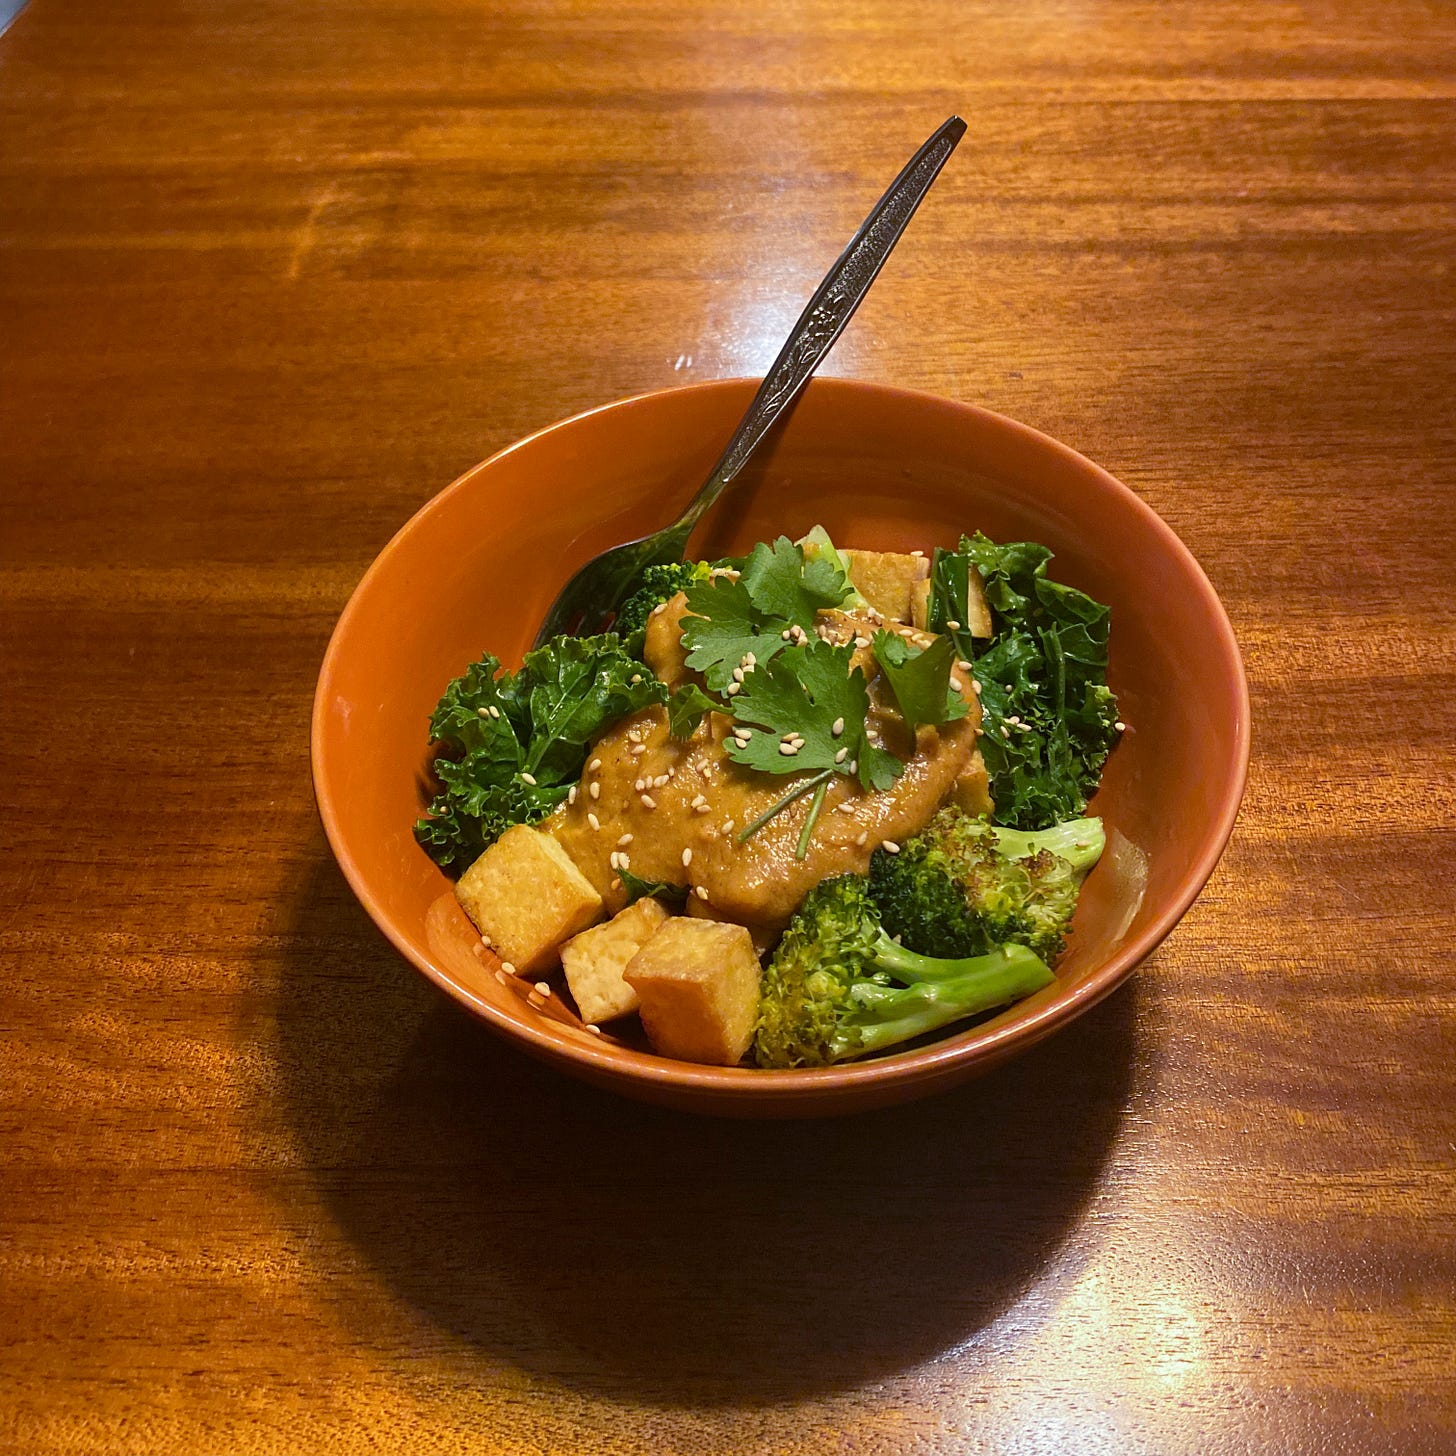 An orange bowl with kale, fried cubes of tofu, and seared broccoli topped with a thick peanut sauce, cilantro, and sesame seeds. There is brown rice underneath, but it's not visible.